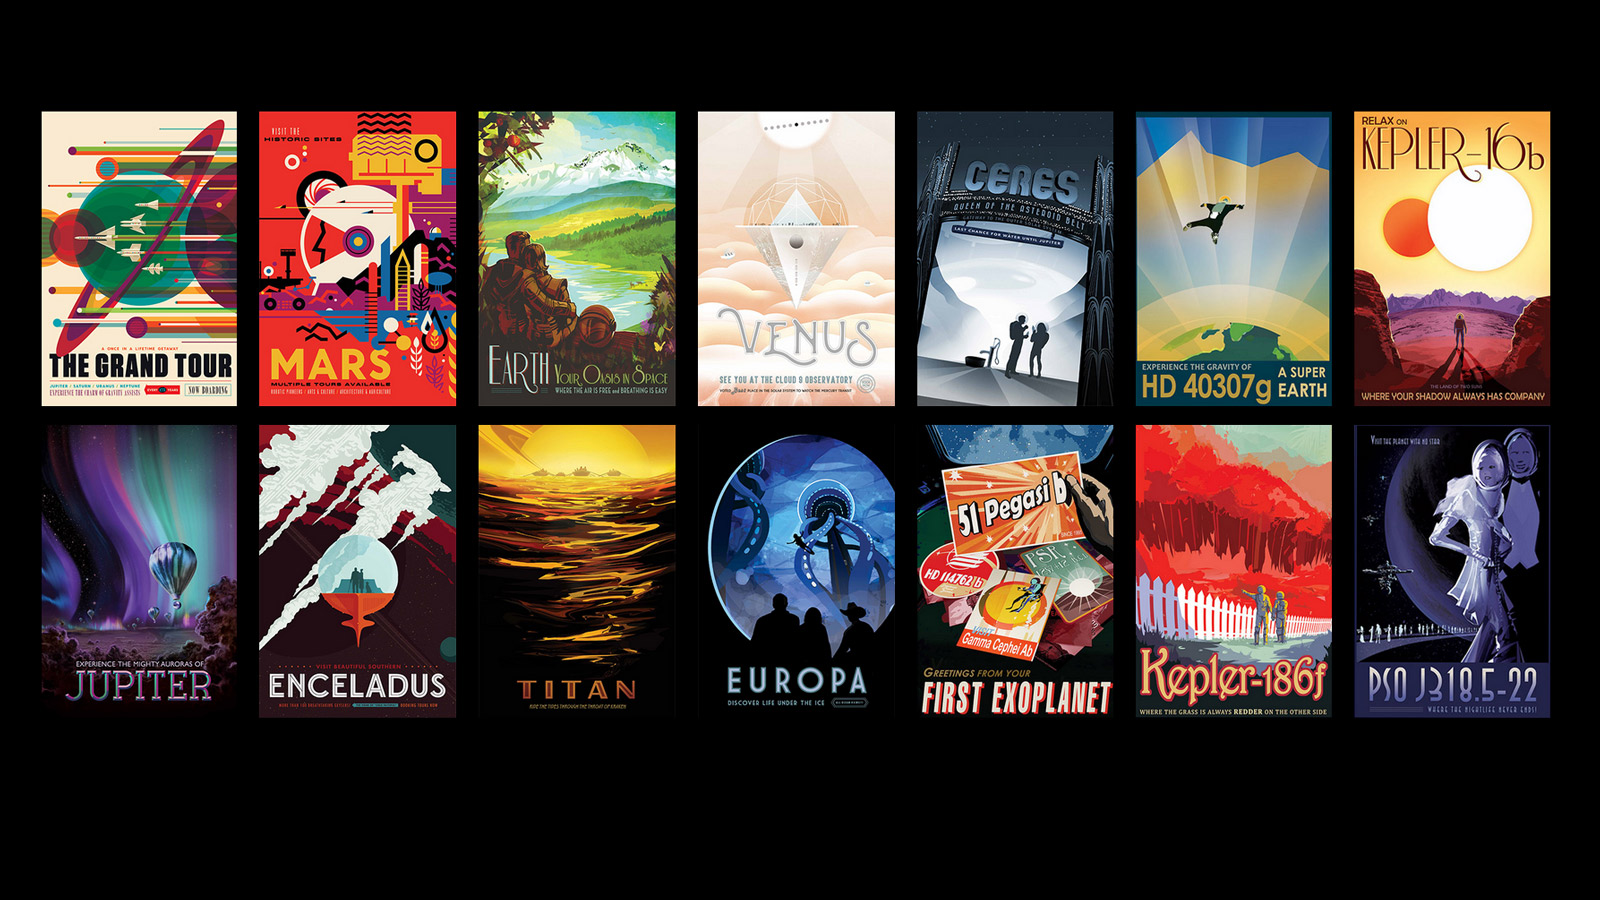 A set of "travel posters" from NASA/JPL depicts various cosmic destinations.